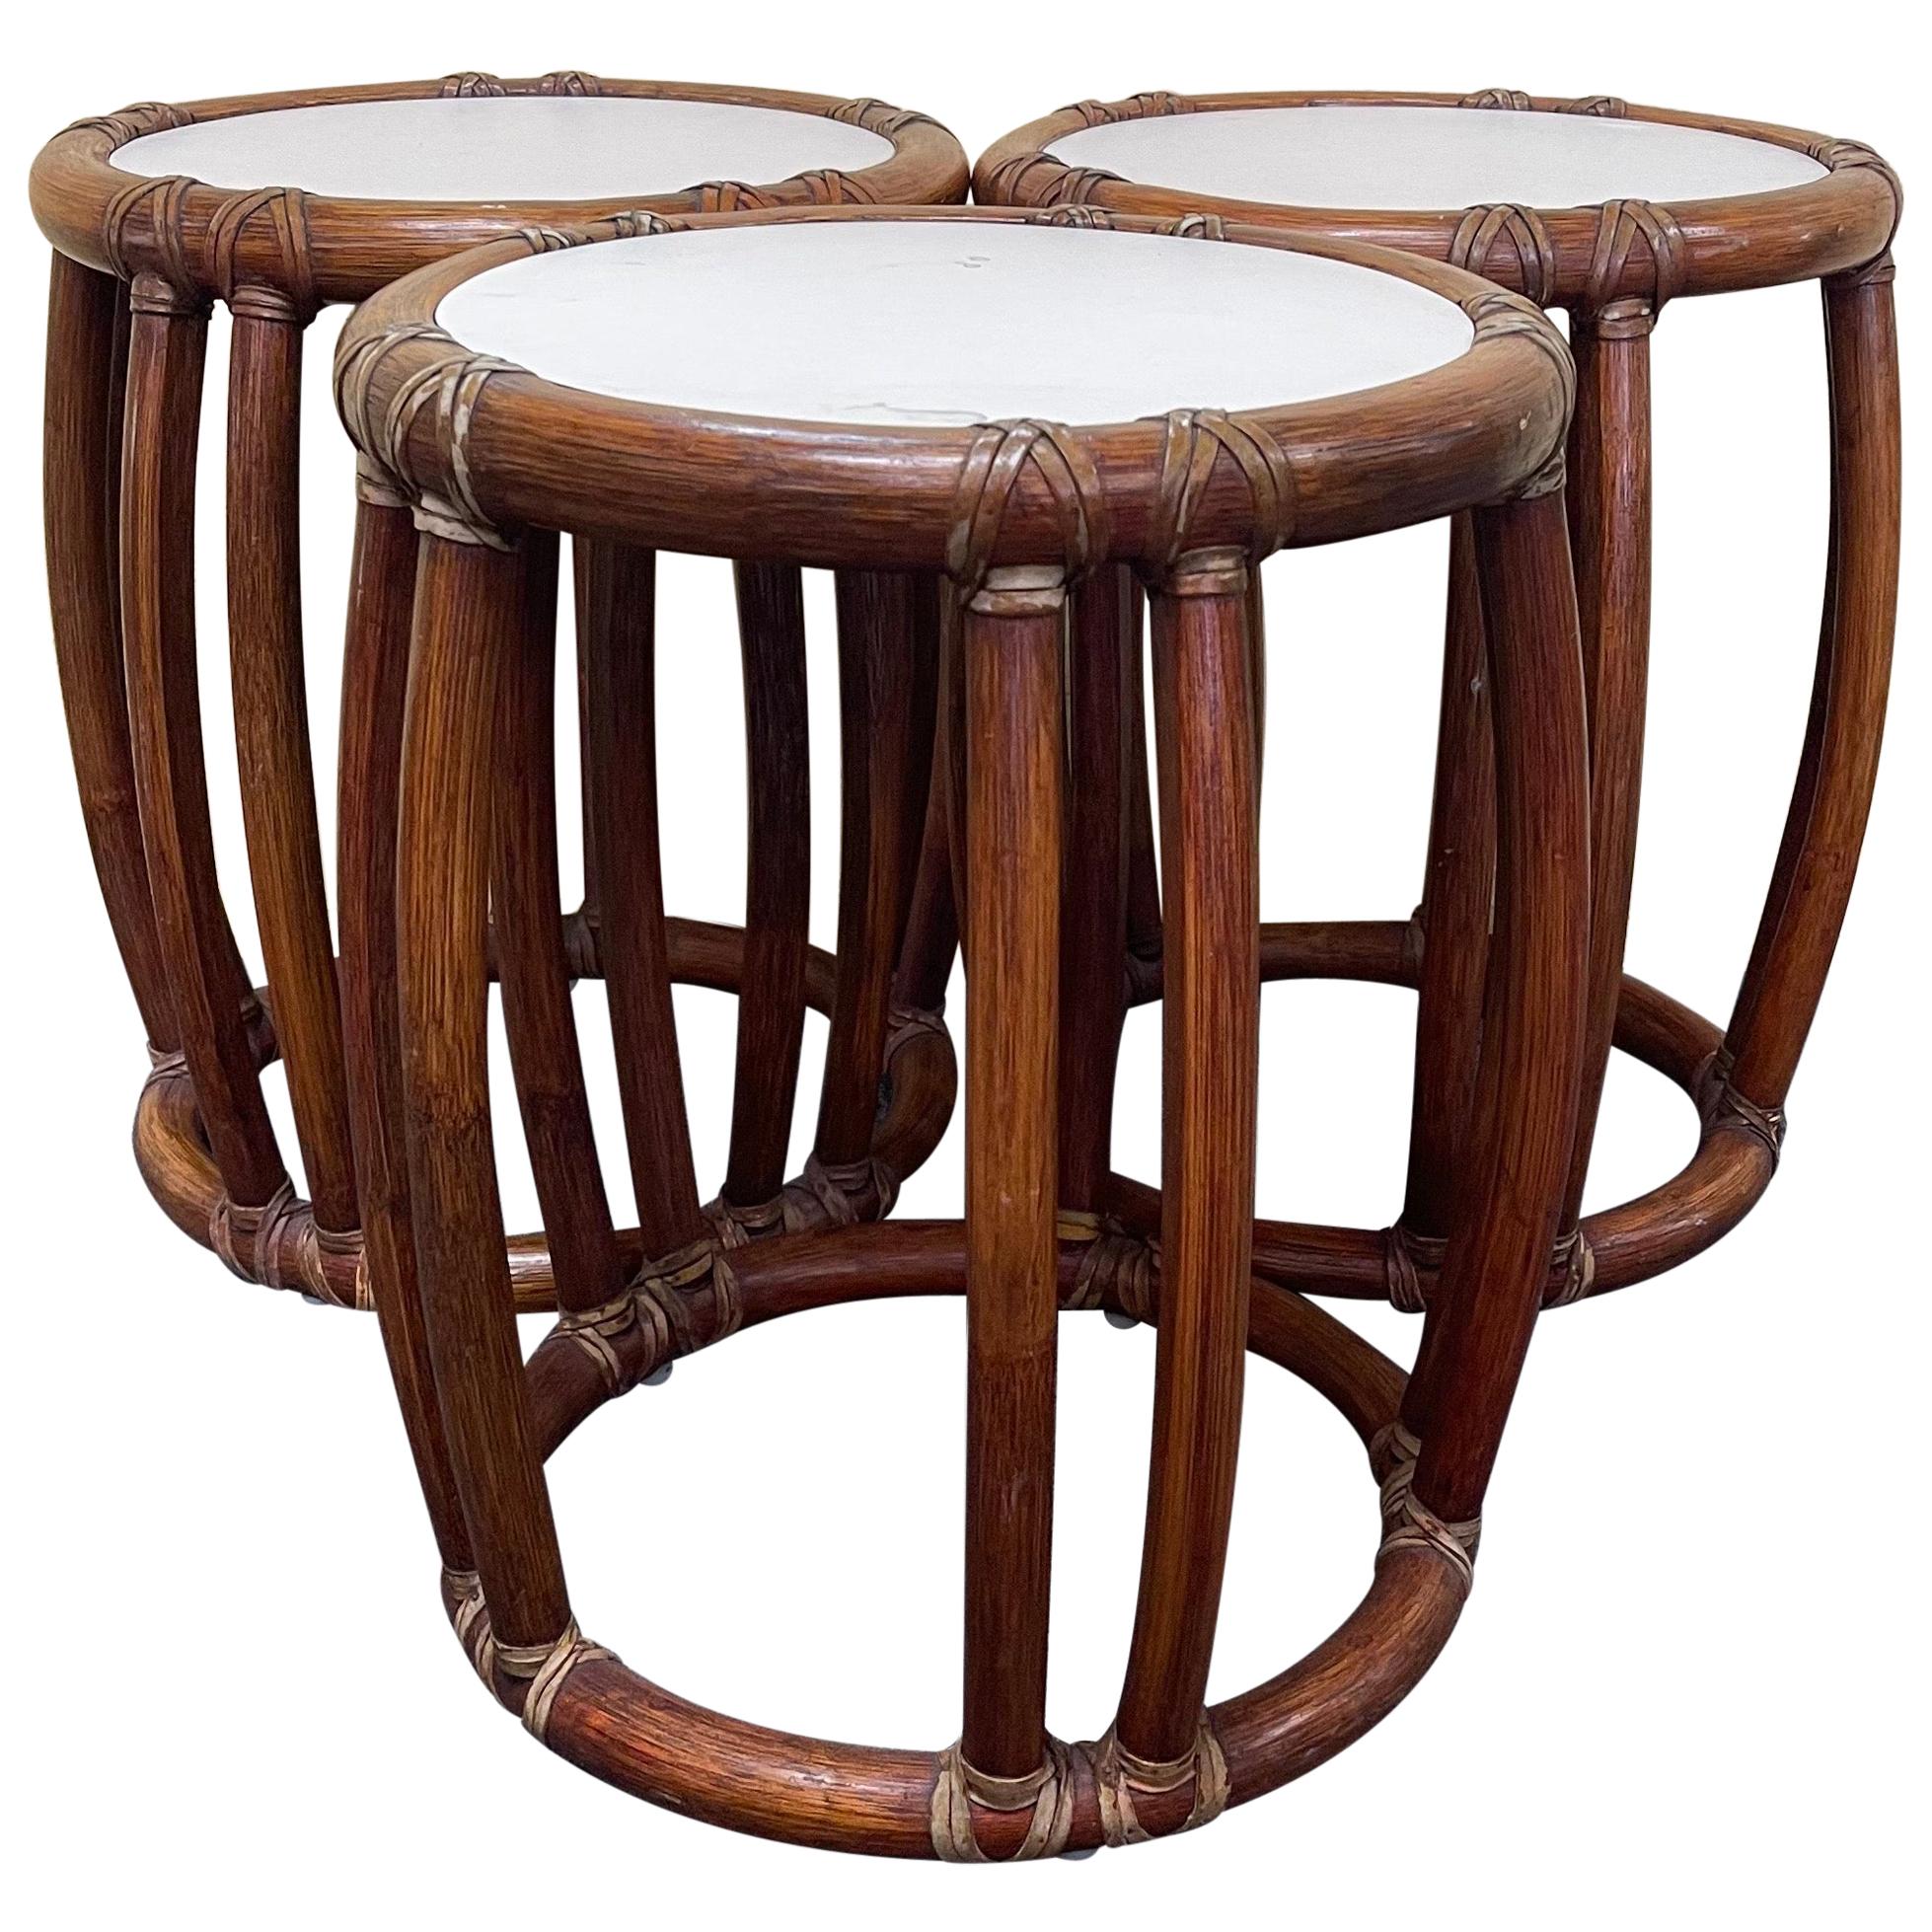 Bamboo Side Tables / Garden Stools by McGuire Furniture Co. of San Francisco